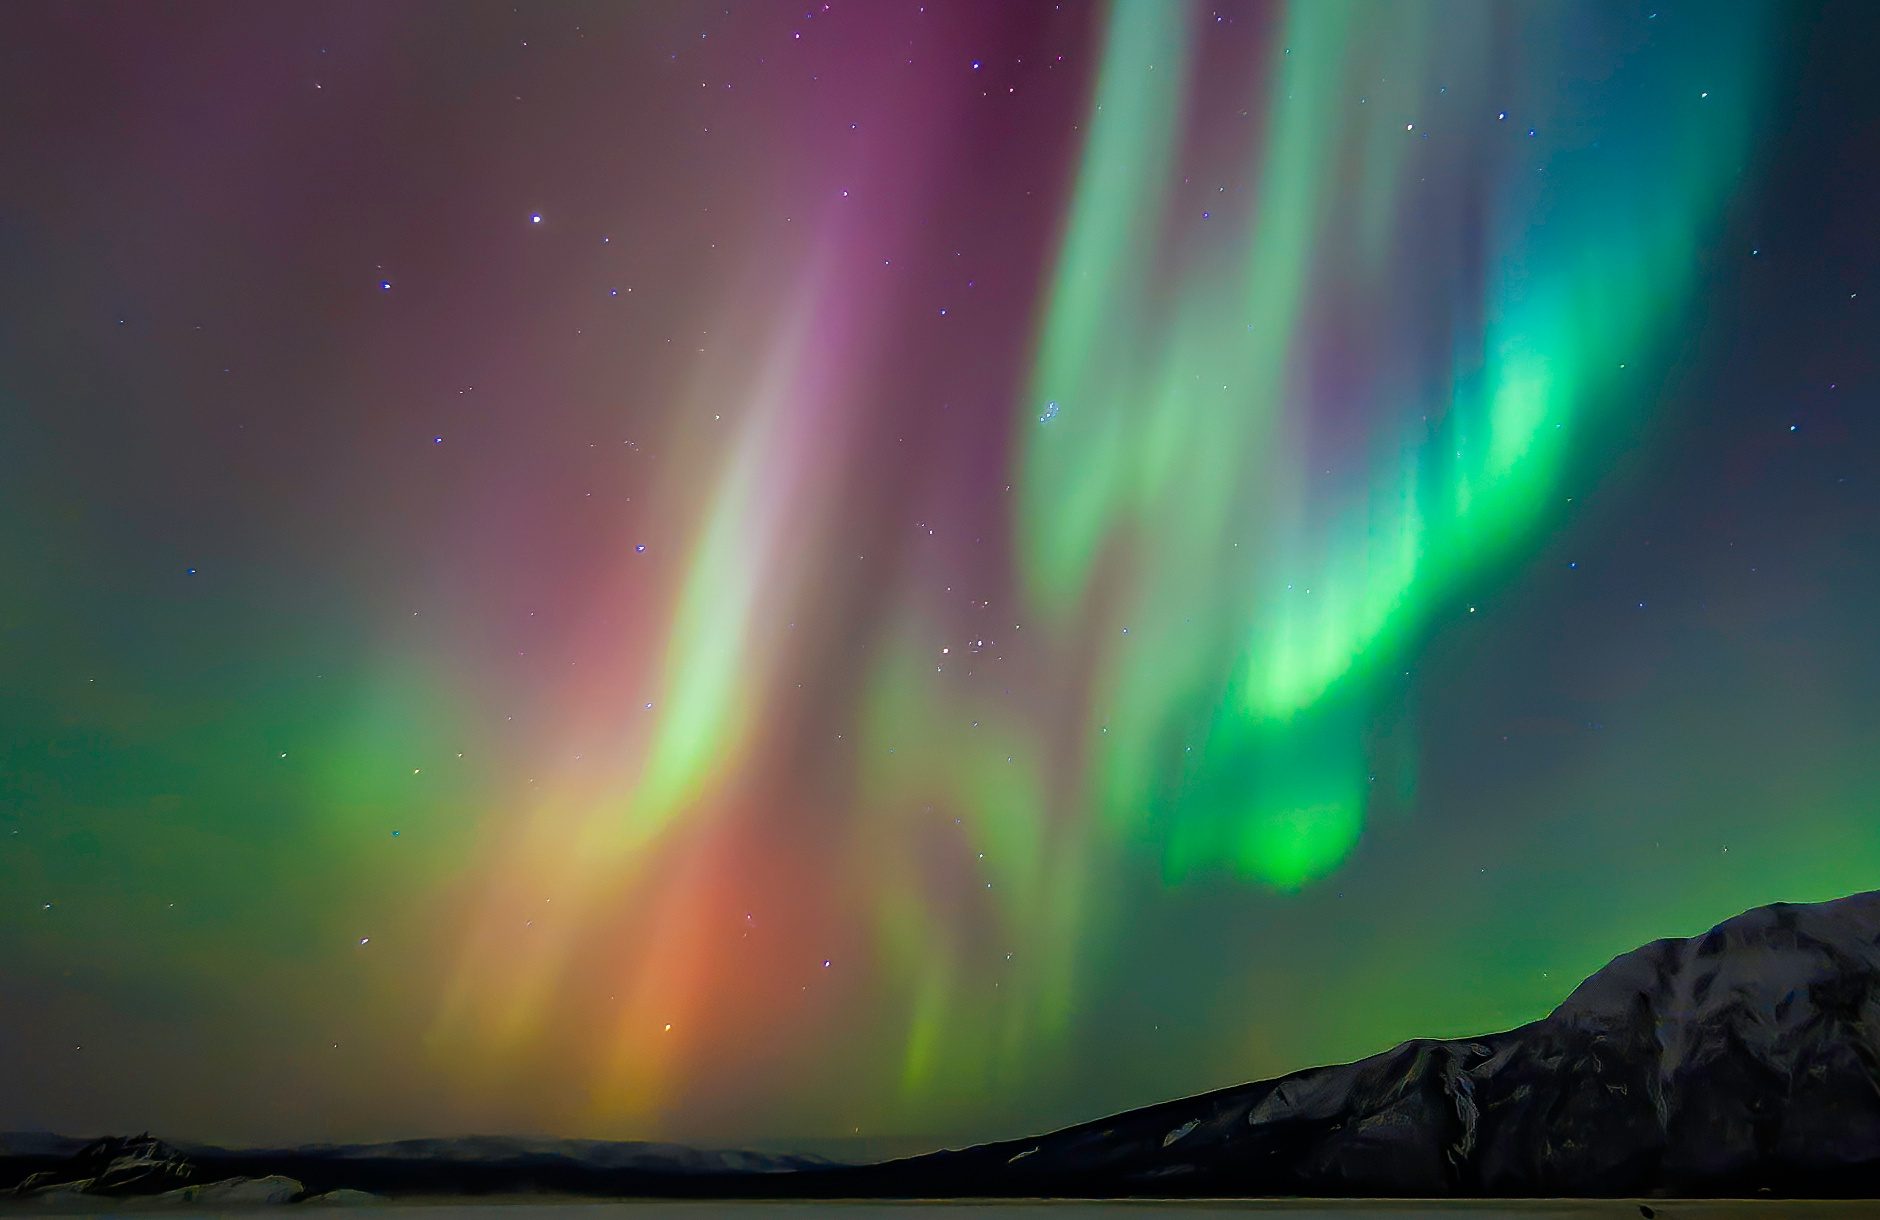 Historical reference to the aurora borealis